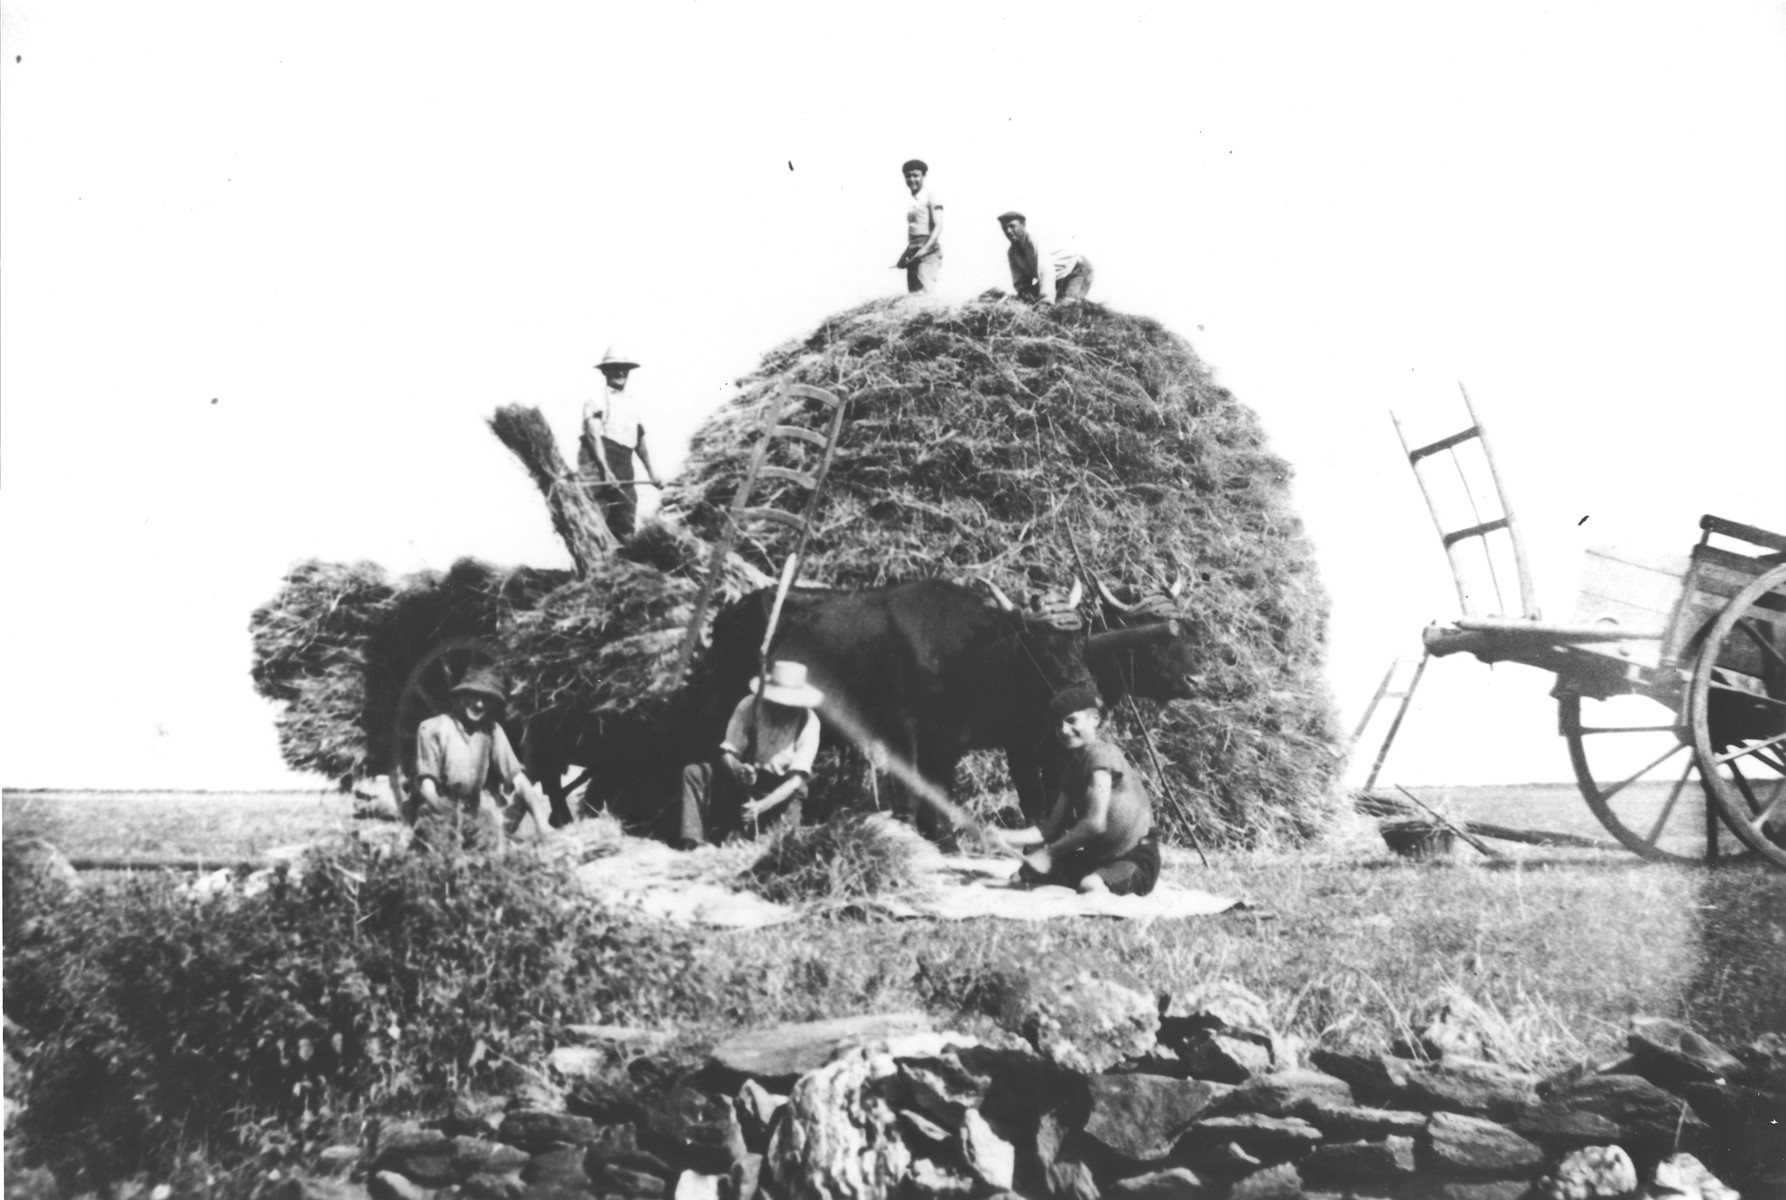 Young agricultural workers pitch hay onto a large haystack on a farm in Treves.  

Among those pictured is Julien Bluschtein, a Jewish youth in hiding.